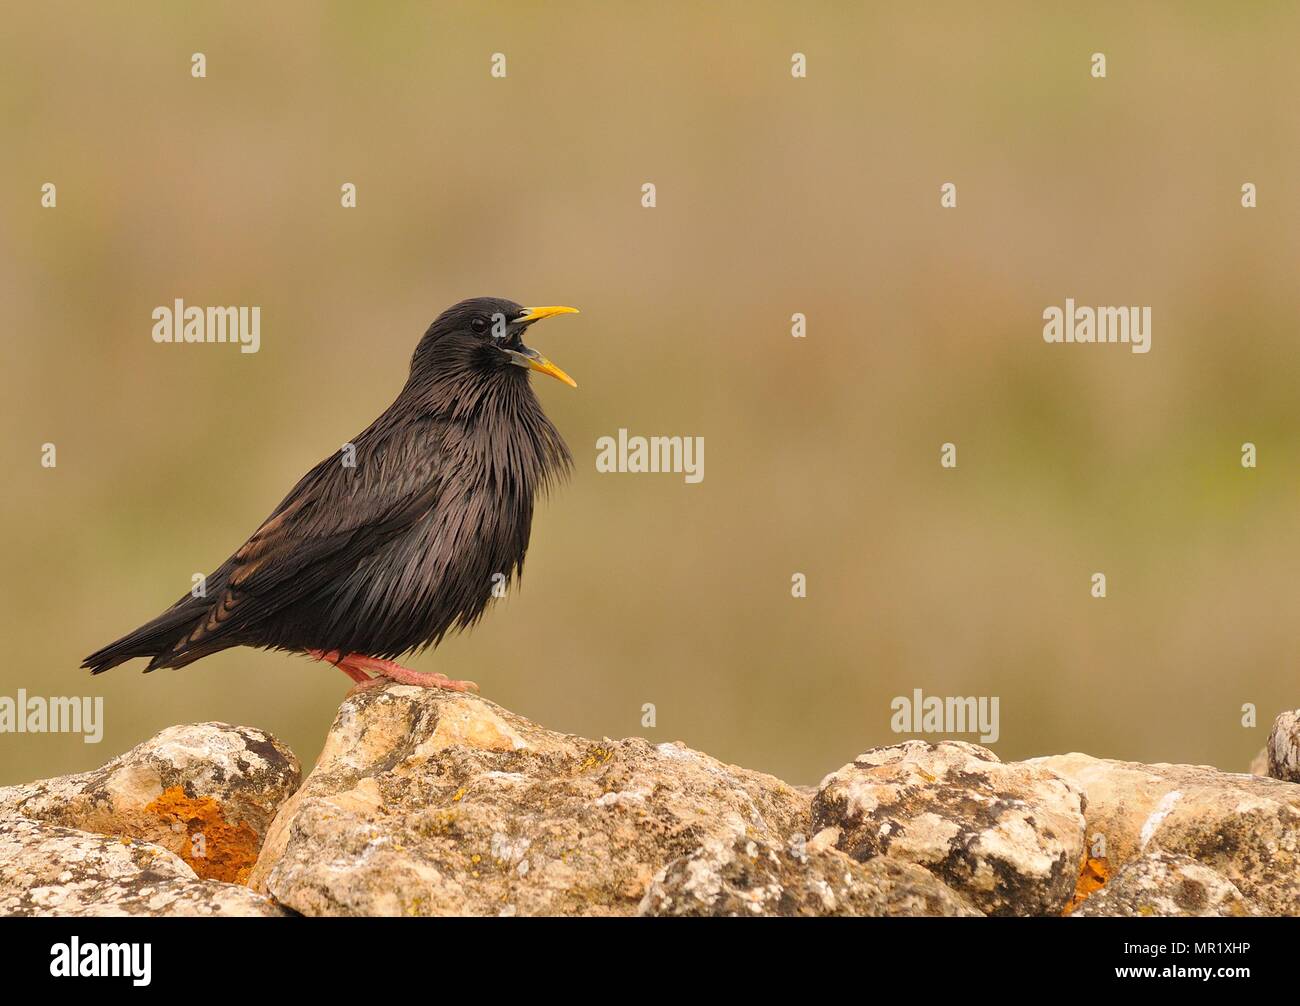 Spotless starling perched on a stone with brown background. Stock Photo